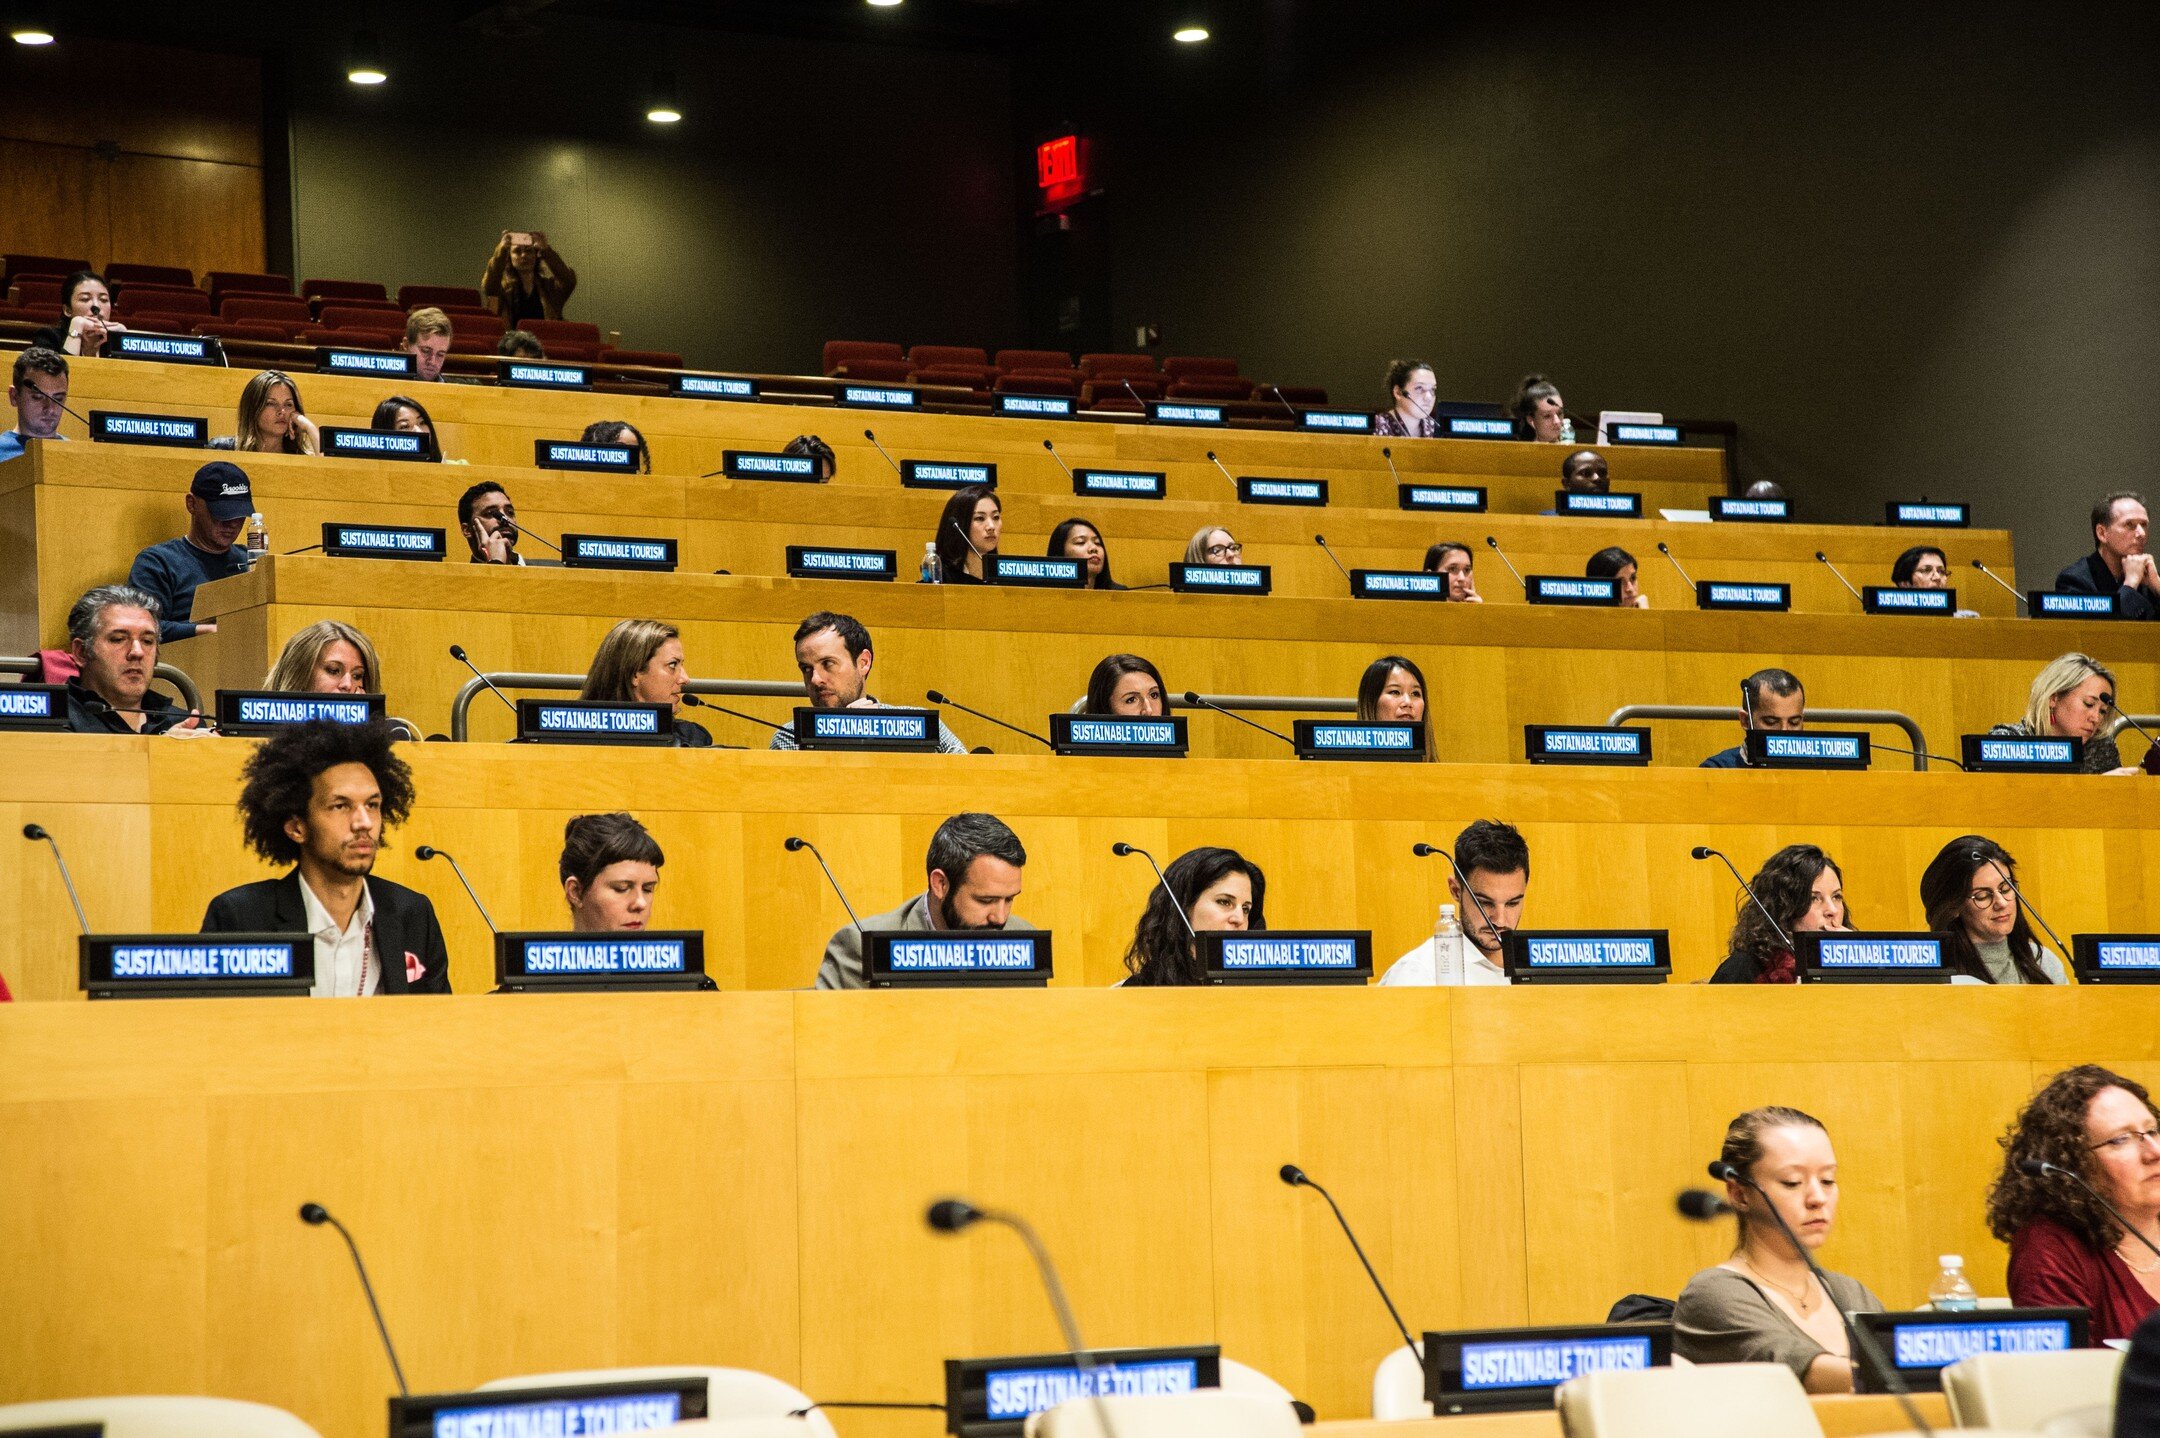 In 2017 I photographed the Sustainable Travel Conference at the United Nations Headquarters in Manhattan.